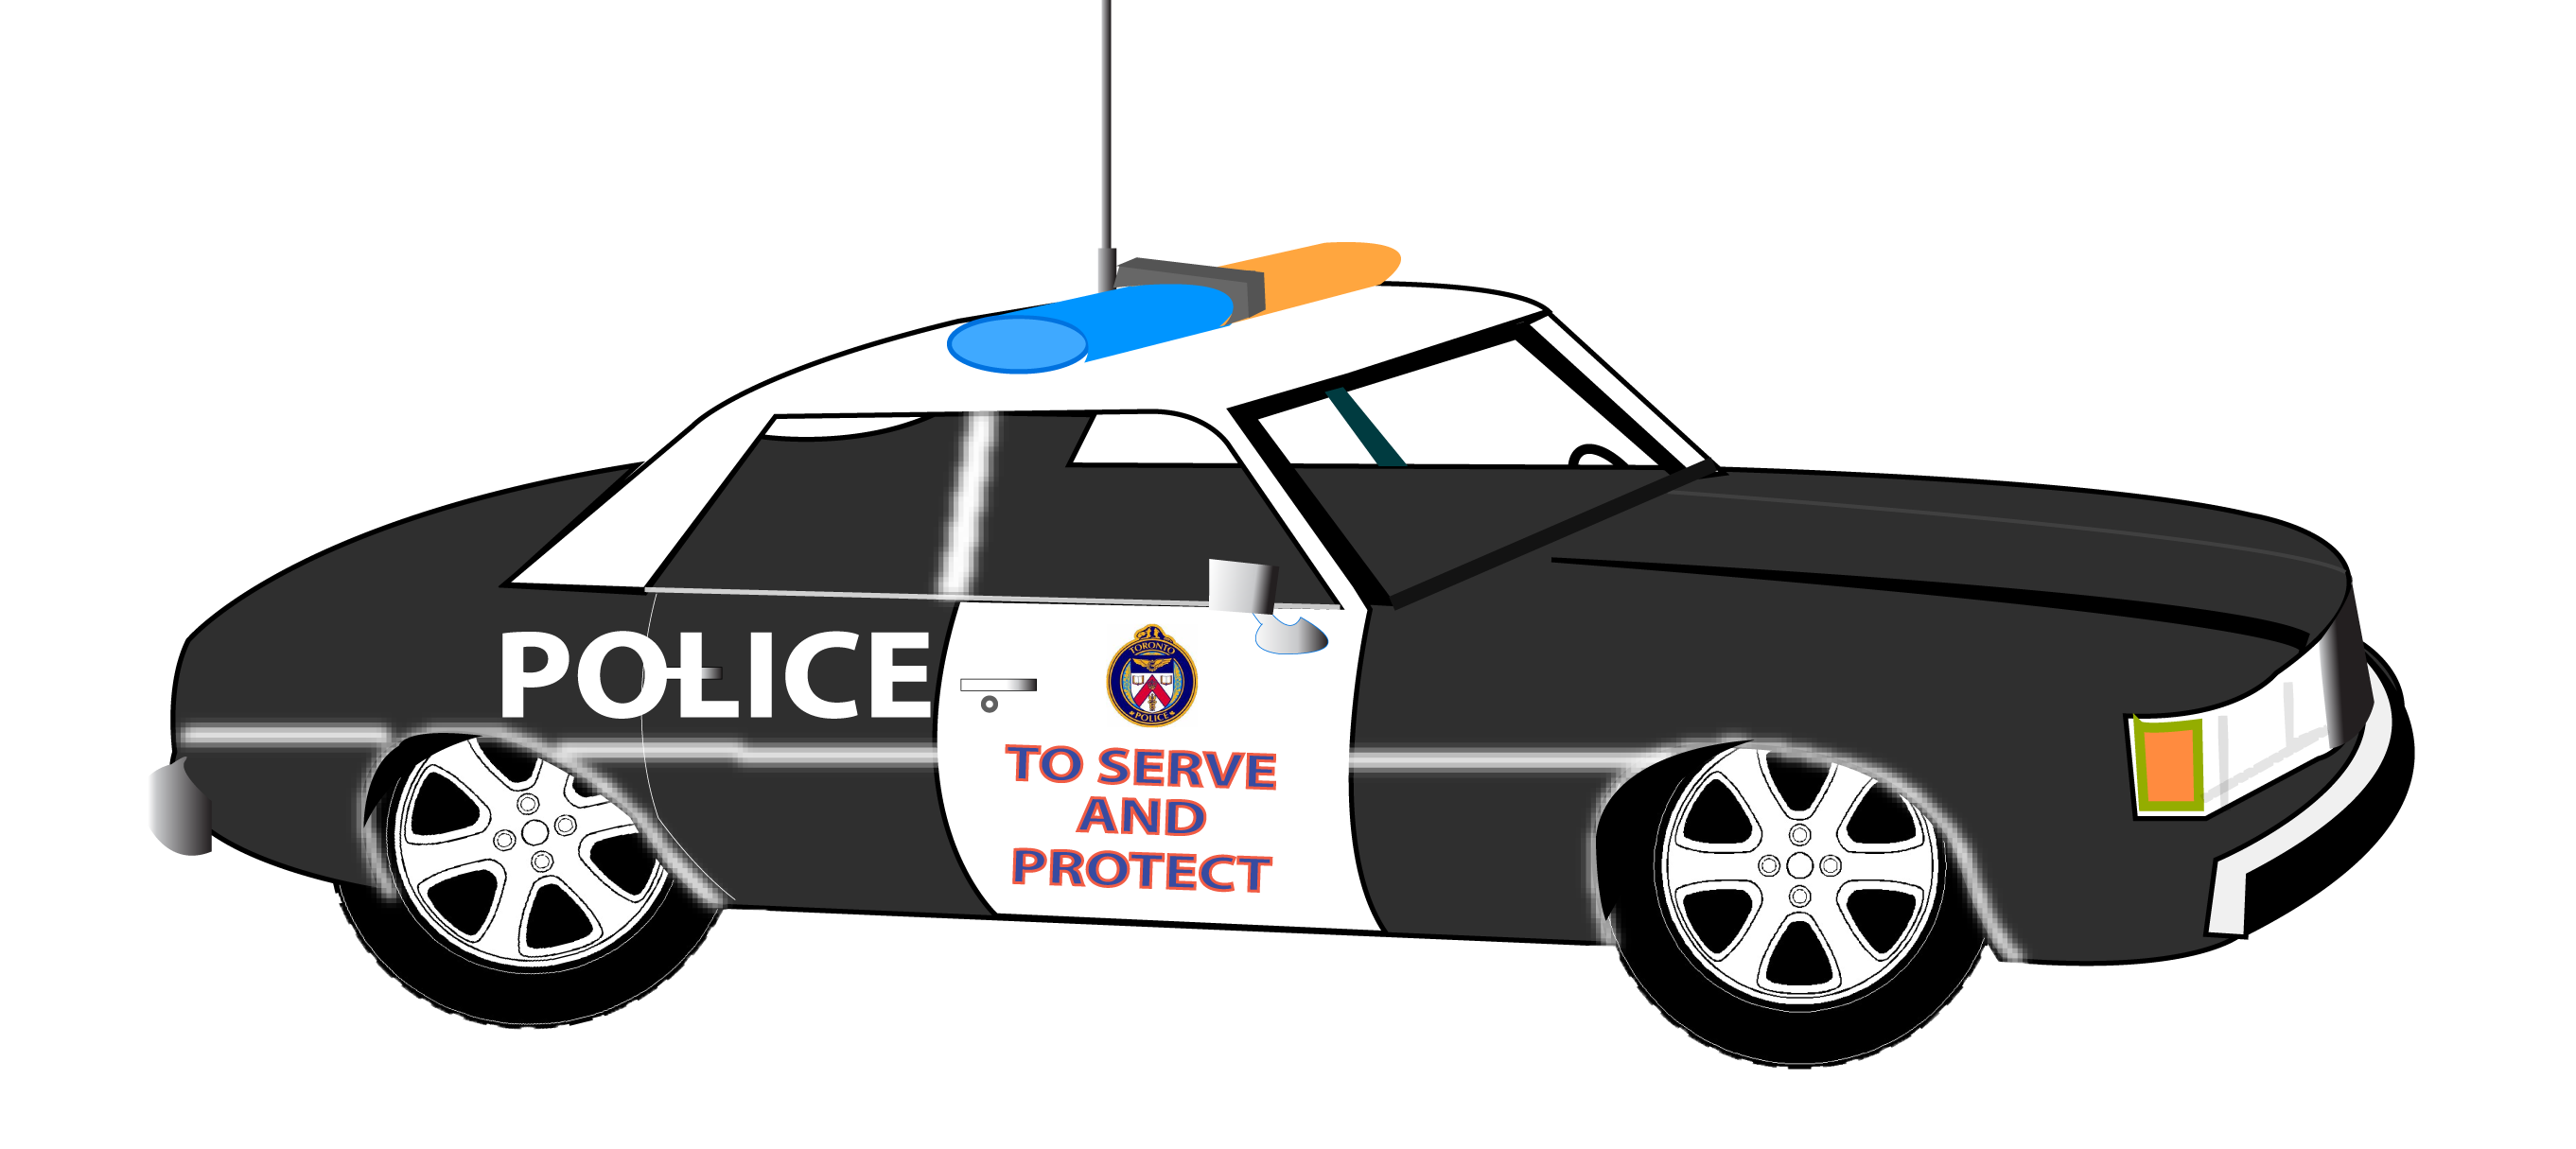 police car clipart images - photo #12